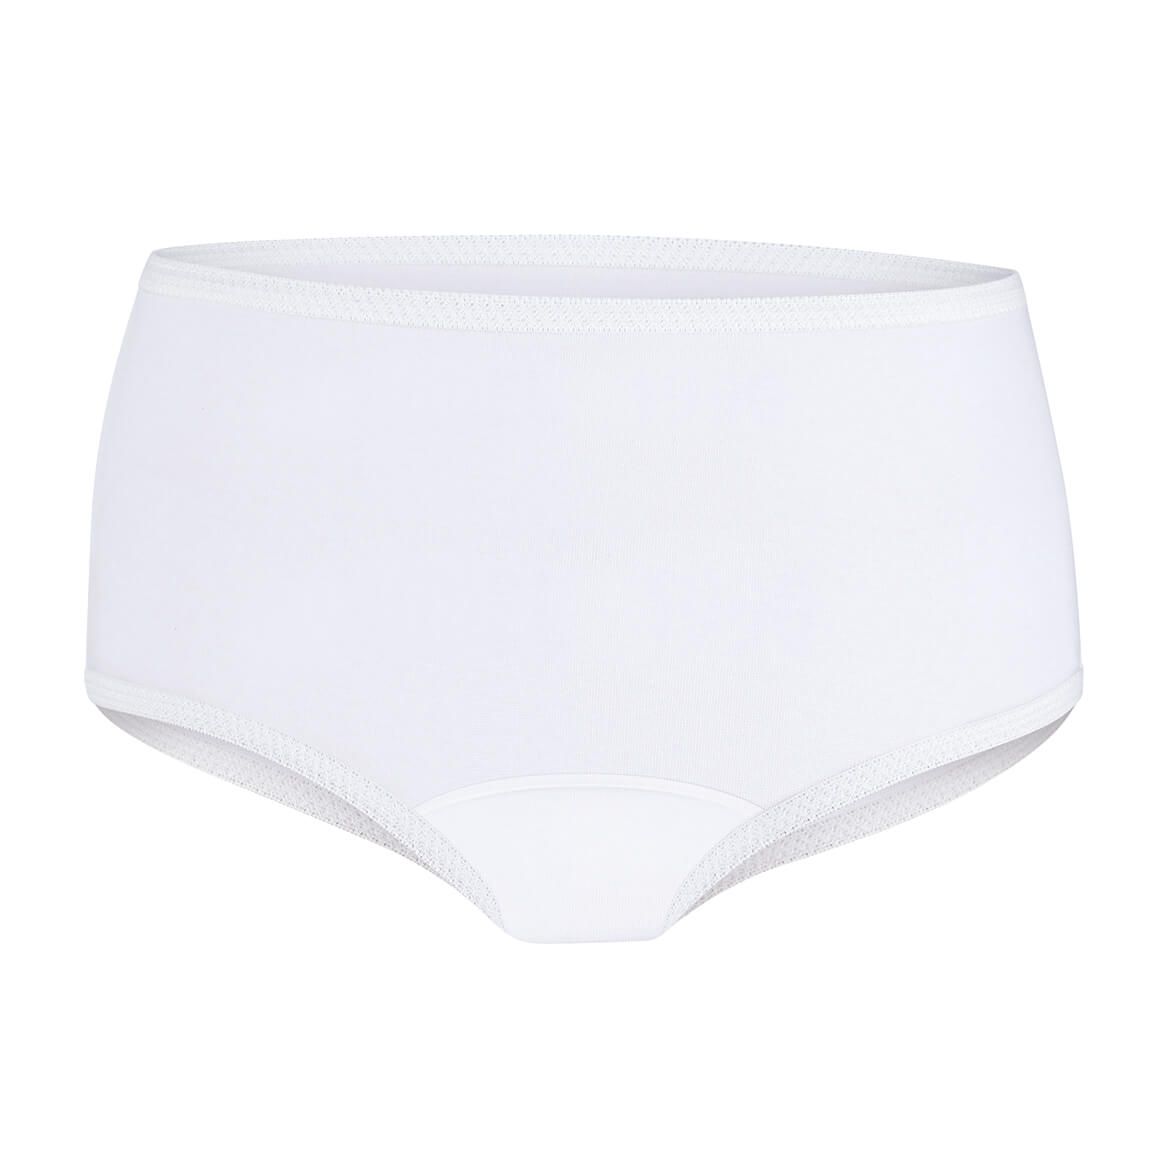 Incontinence Underpants Ladies Regular Absorbency S/3 + '-' + 370070